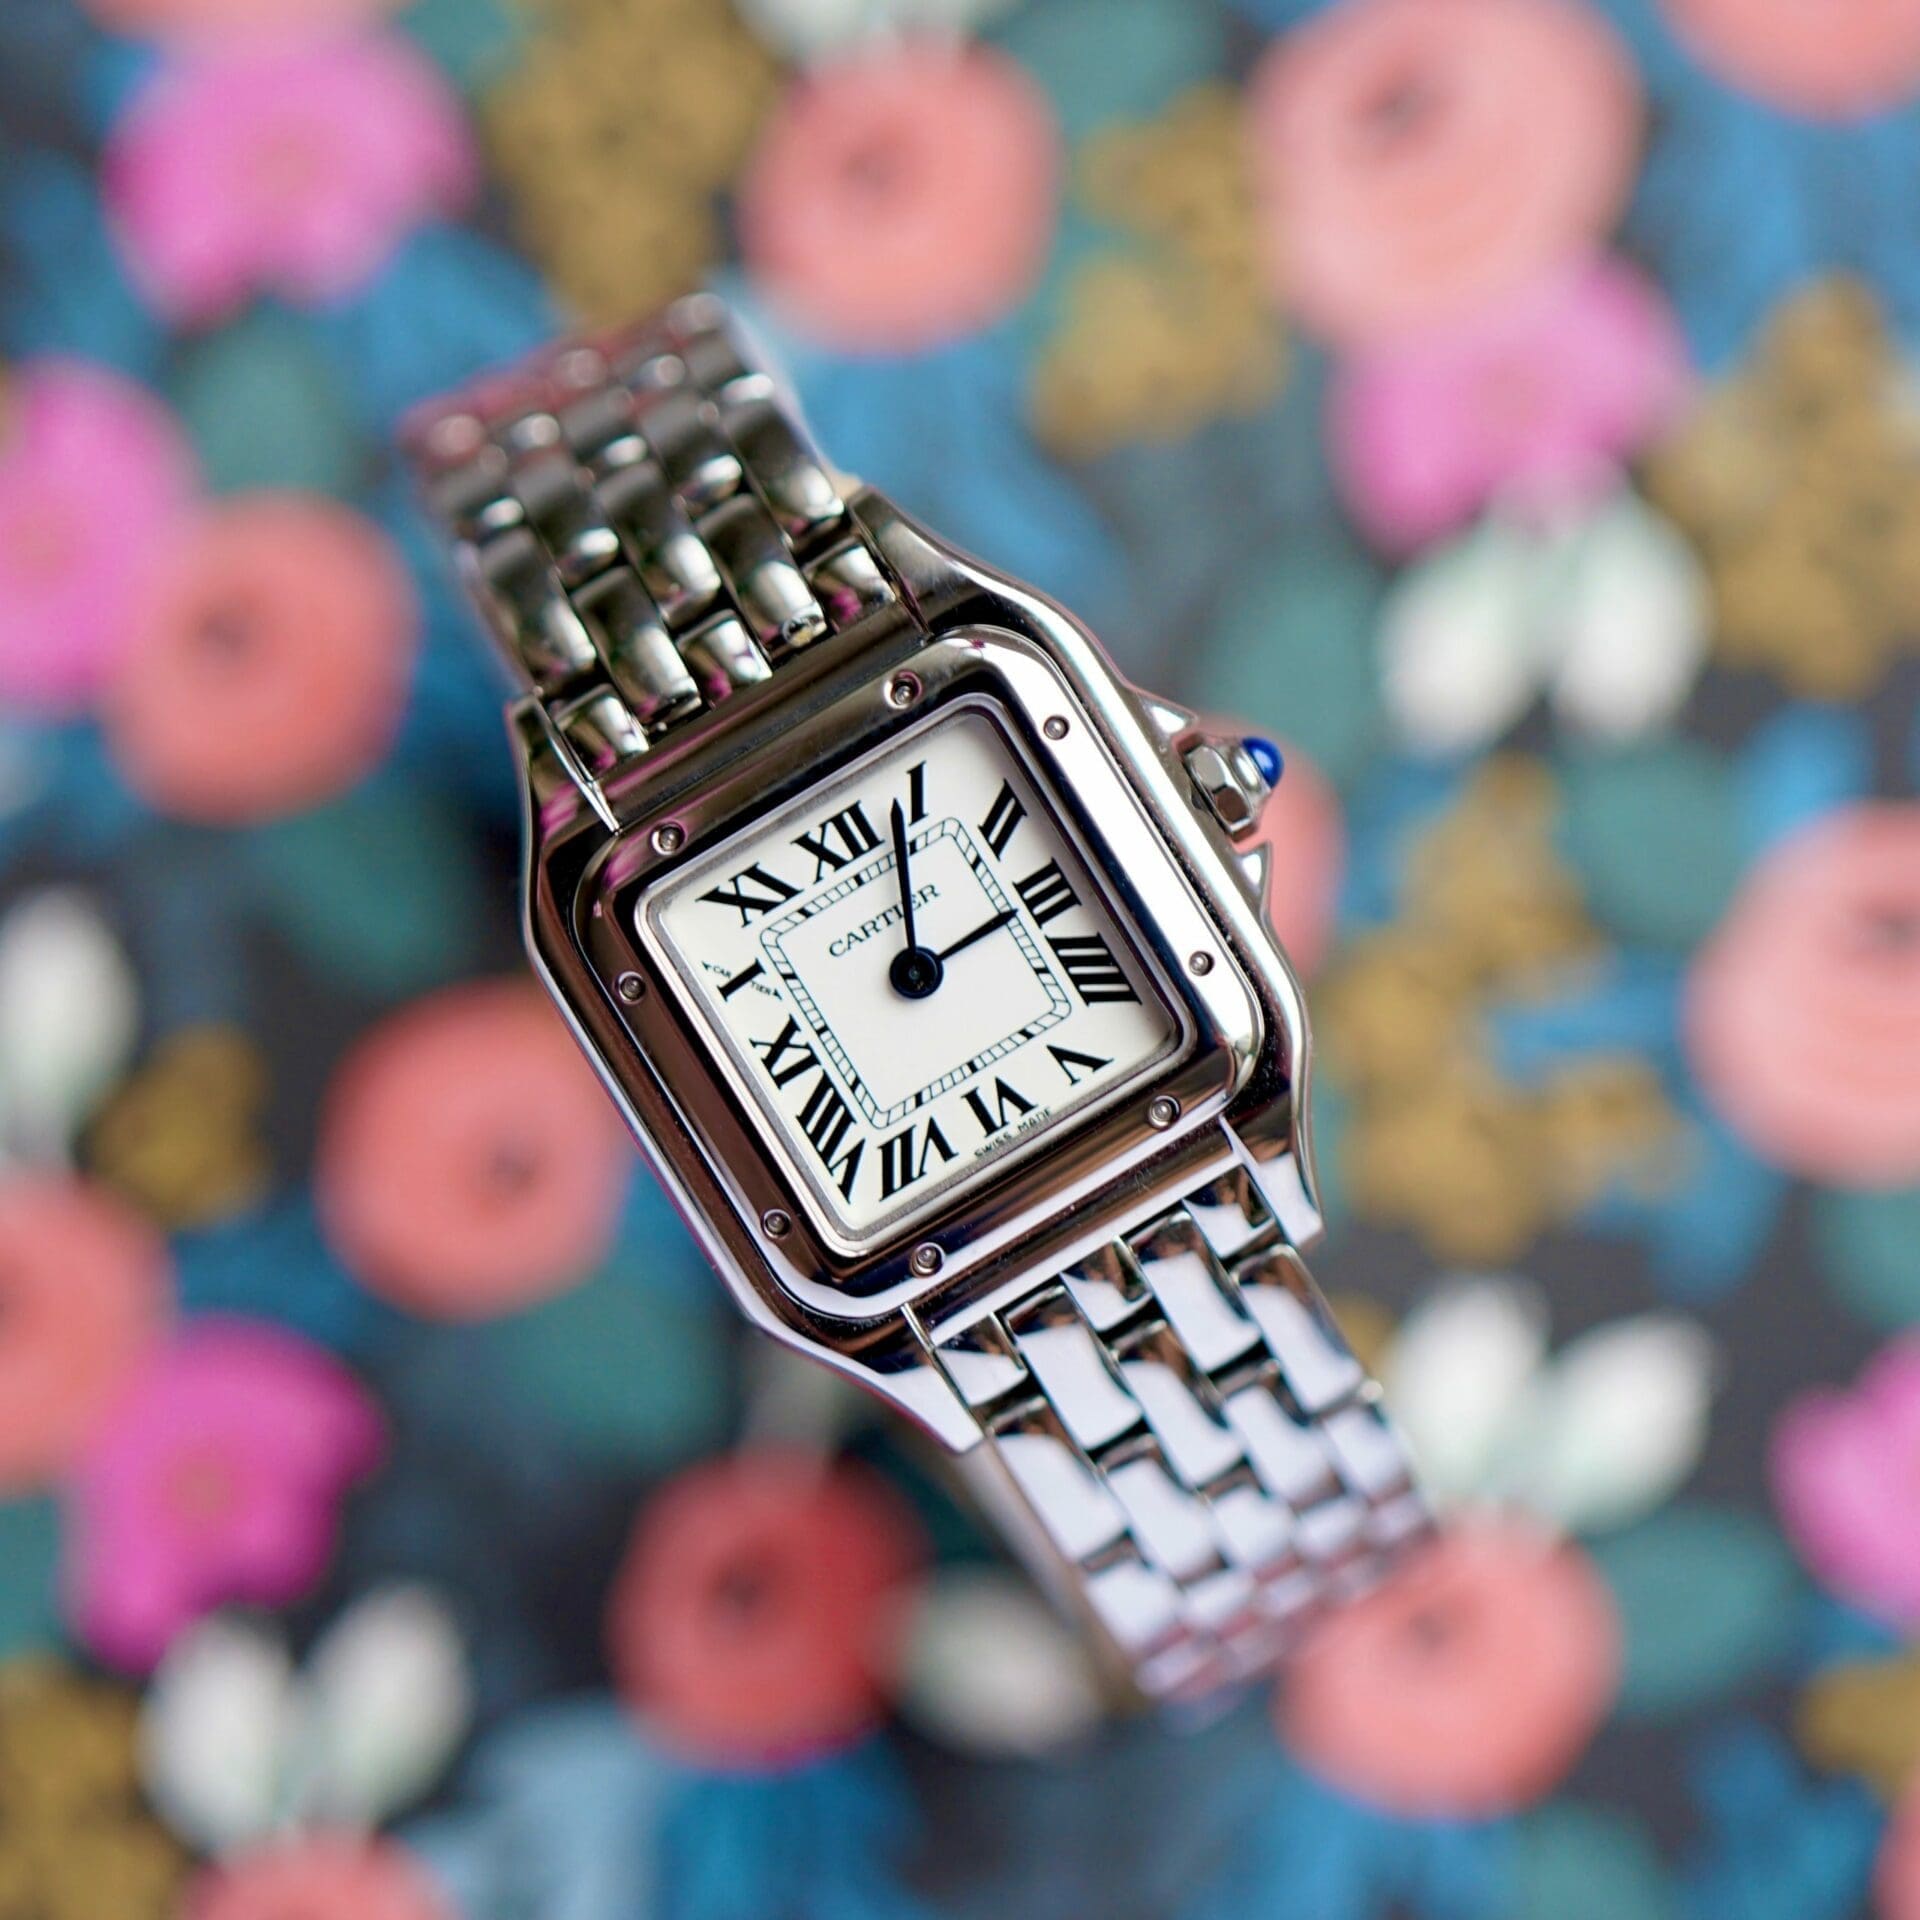 WHO TO FOLLOW: @therubyhour and her amazing watch stories